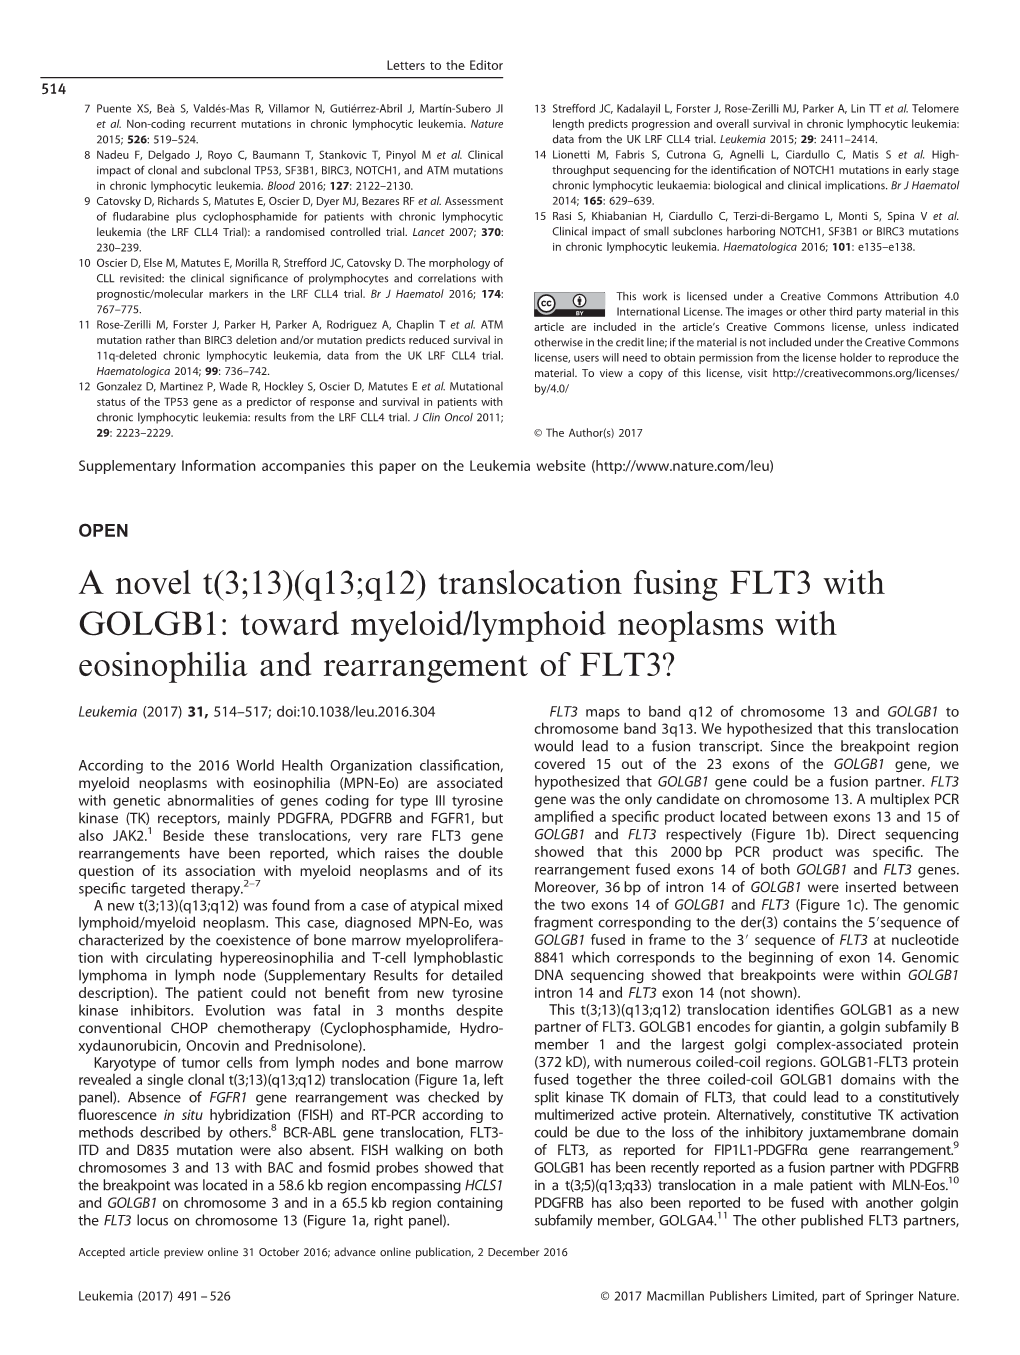 (Q13;Q12) Translocation Fusing FLT3 with GOLGB1: Toward Myeloid/Lymphoid Neoplasms with Eosinophilia and Rearrangement of FLT3?